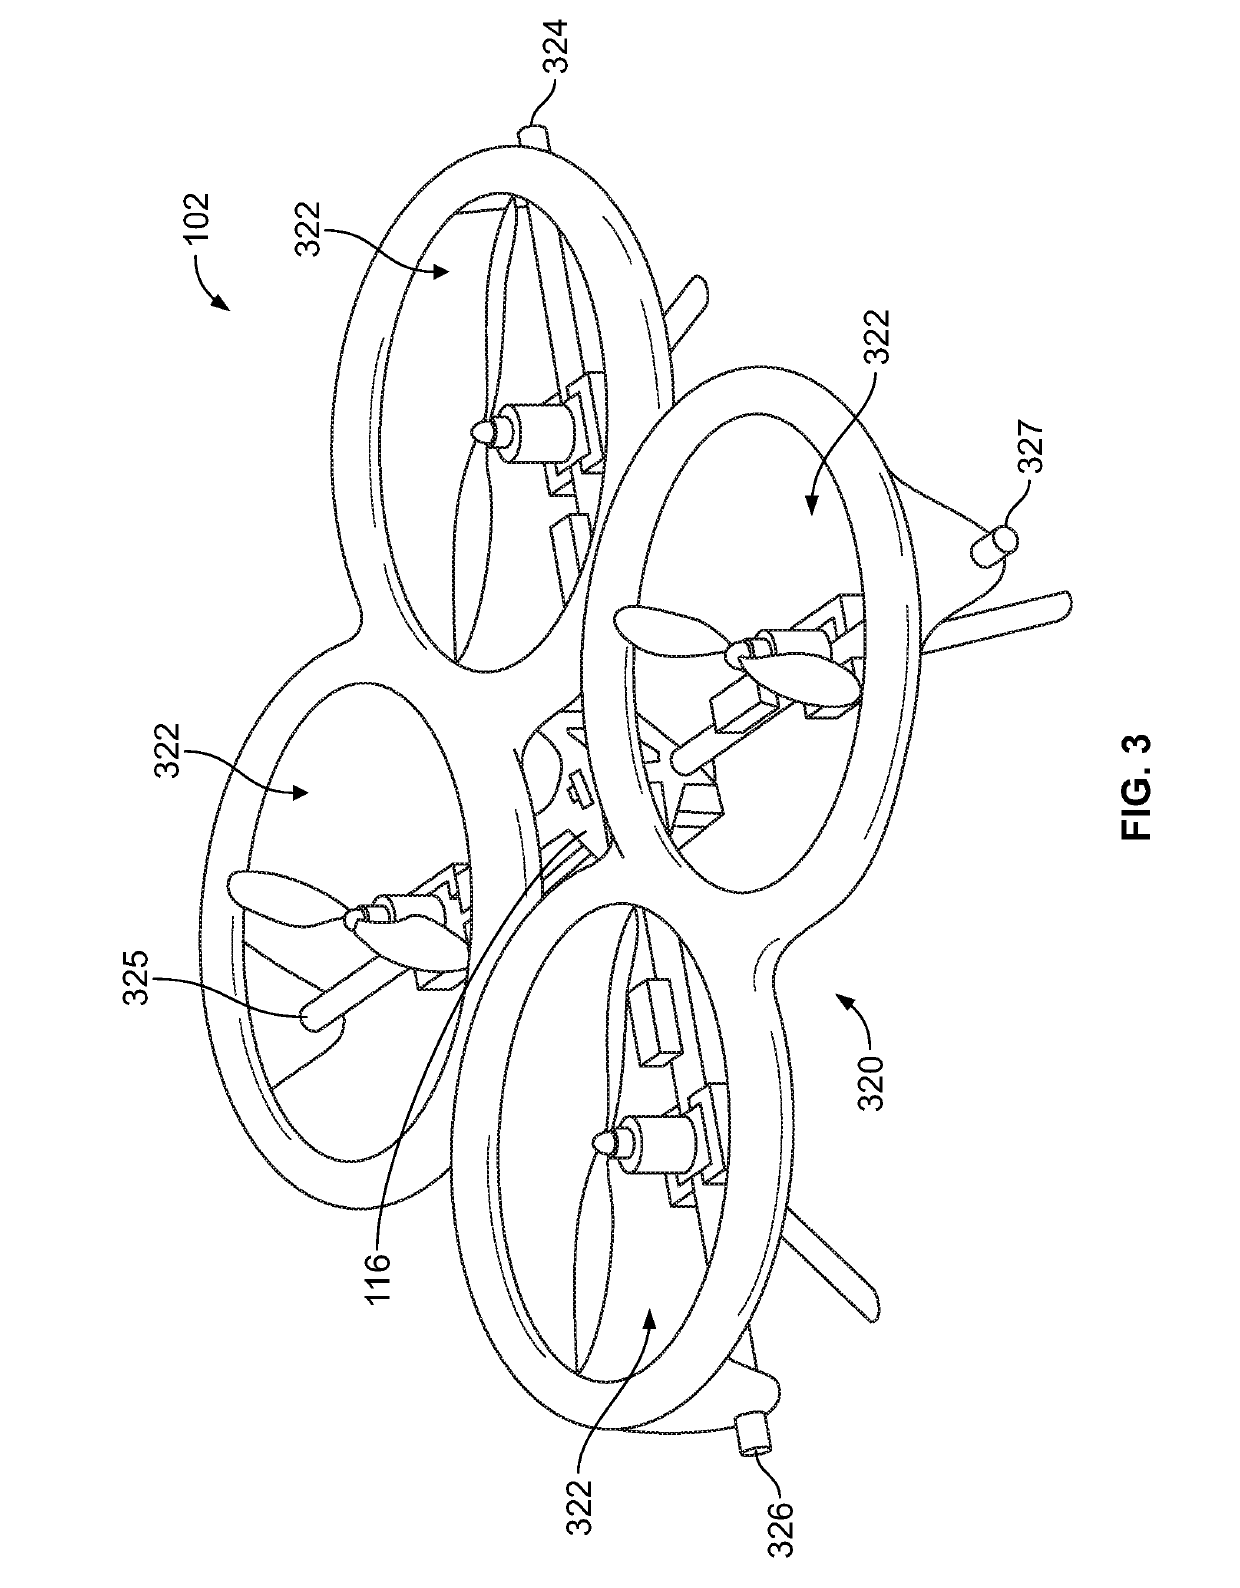 Unmanned aerial vehicle (UAV) landing systems and methods